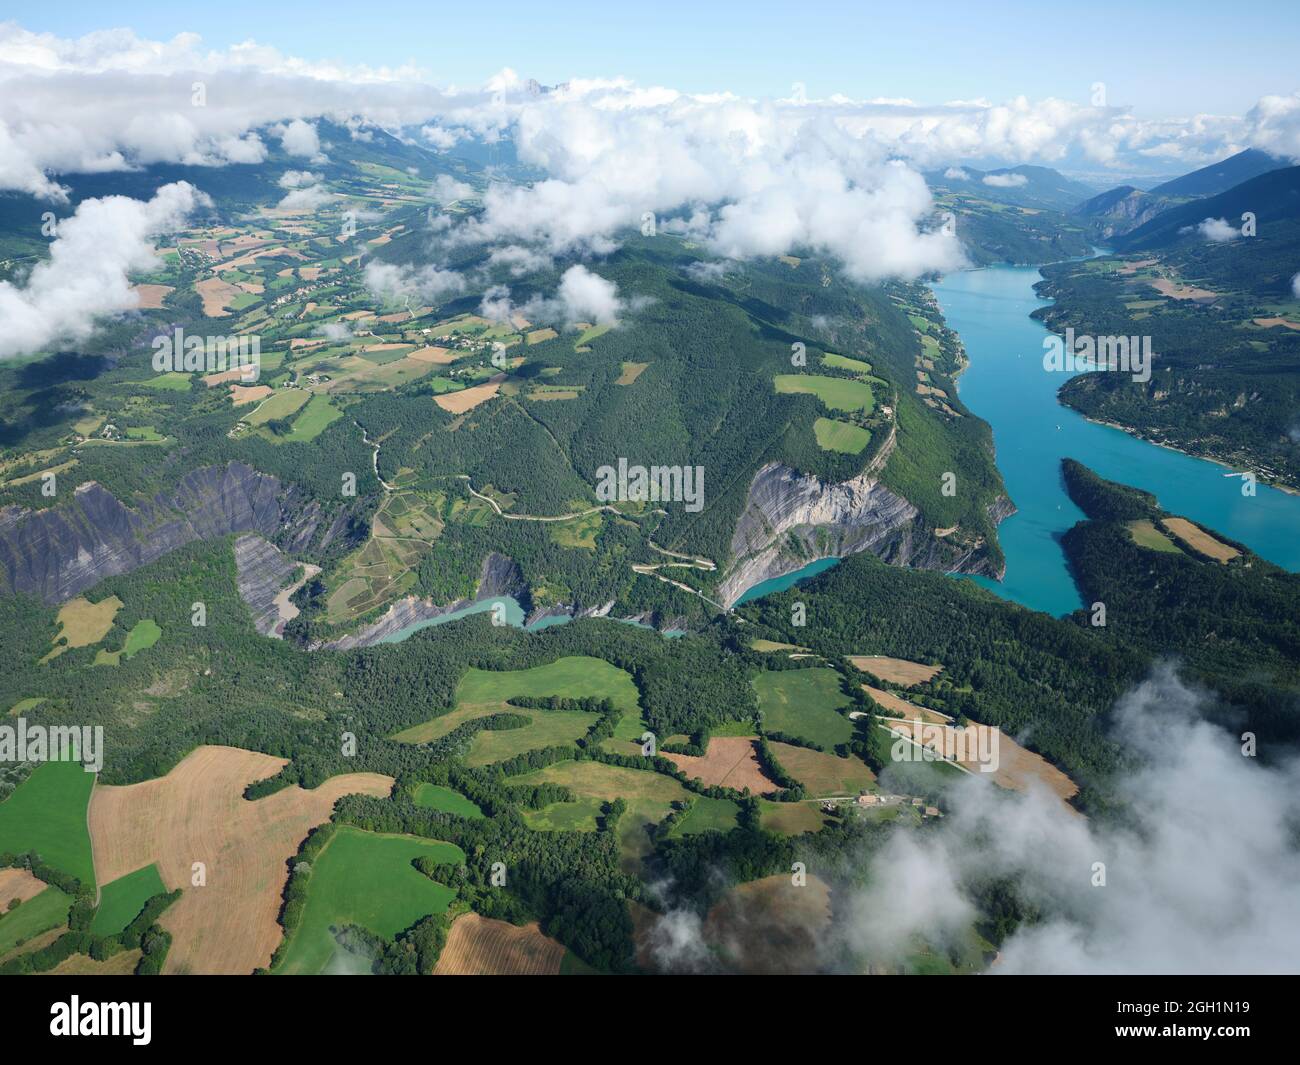 AERIAL VIEW. Lake Monteynard-Avignonet, a reservoir on the Drac Valley and the farmlands of the Trièves Region, Isère, France. Stock Photo